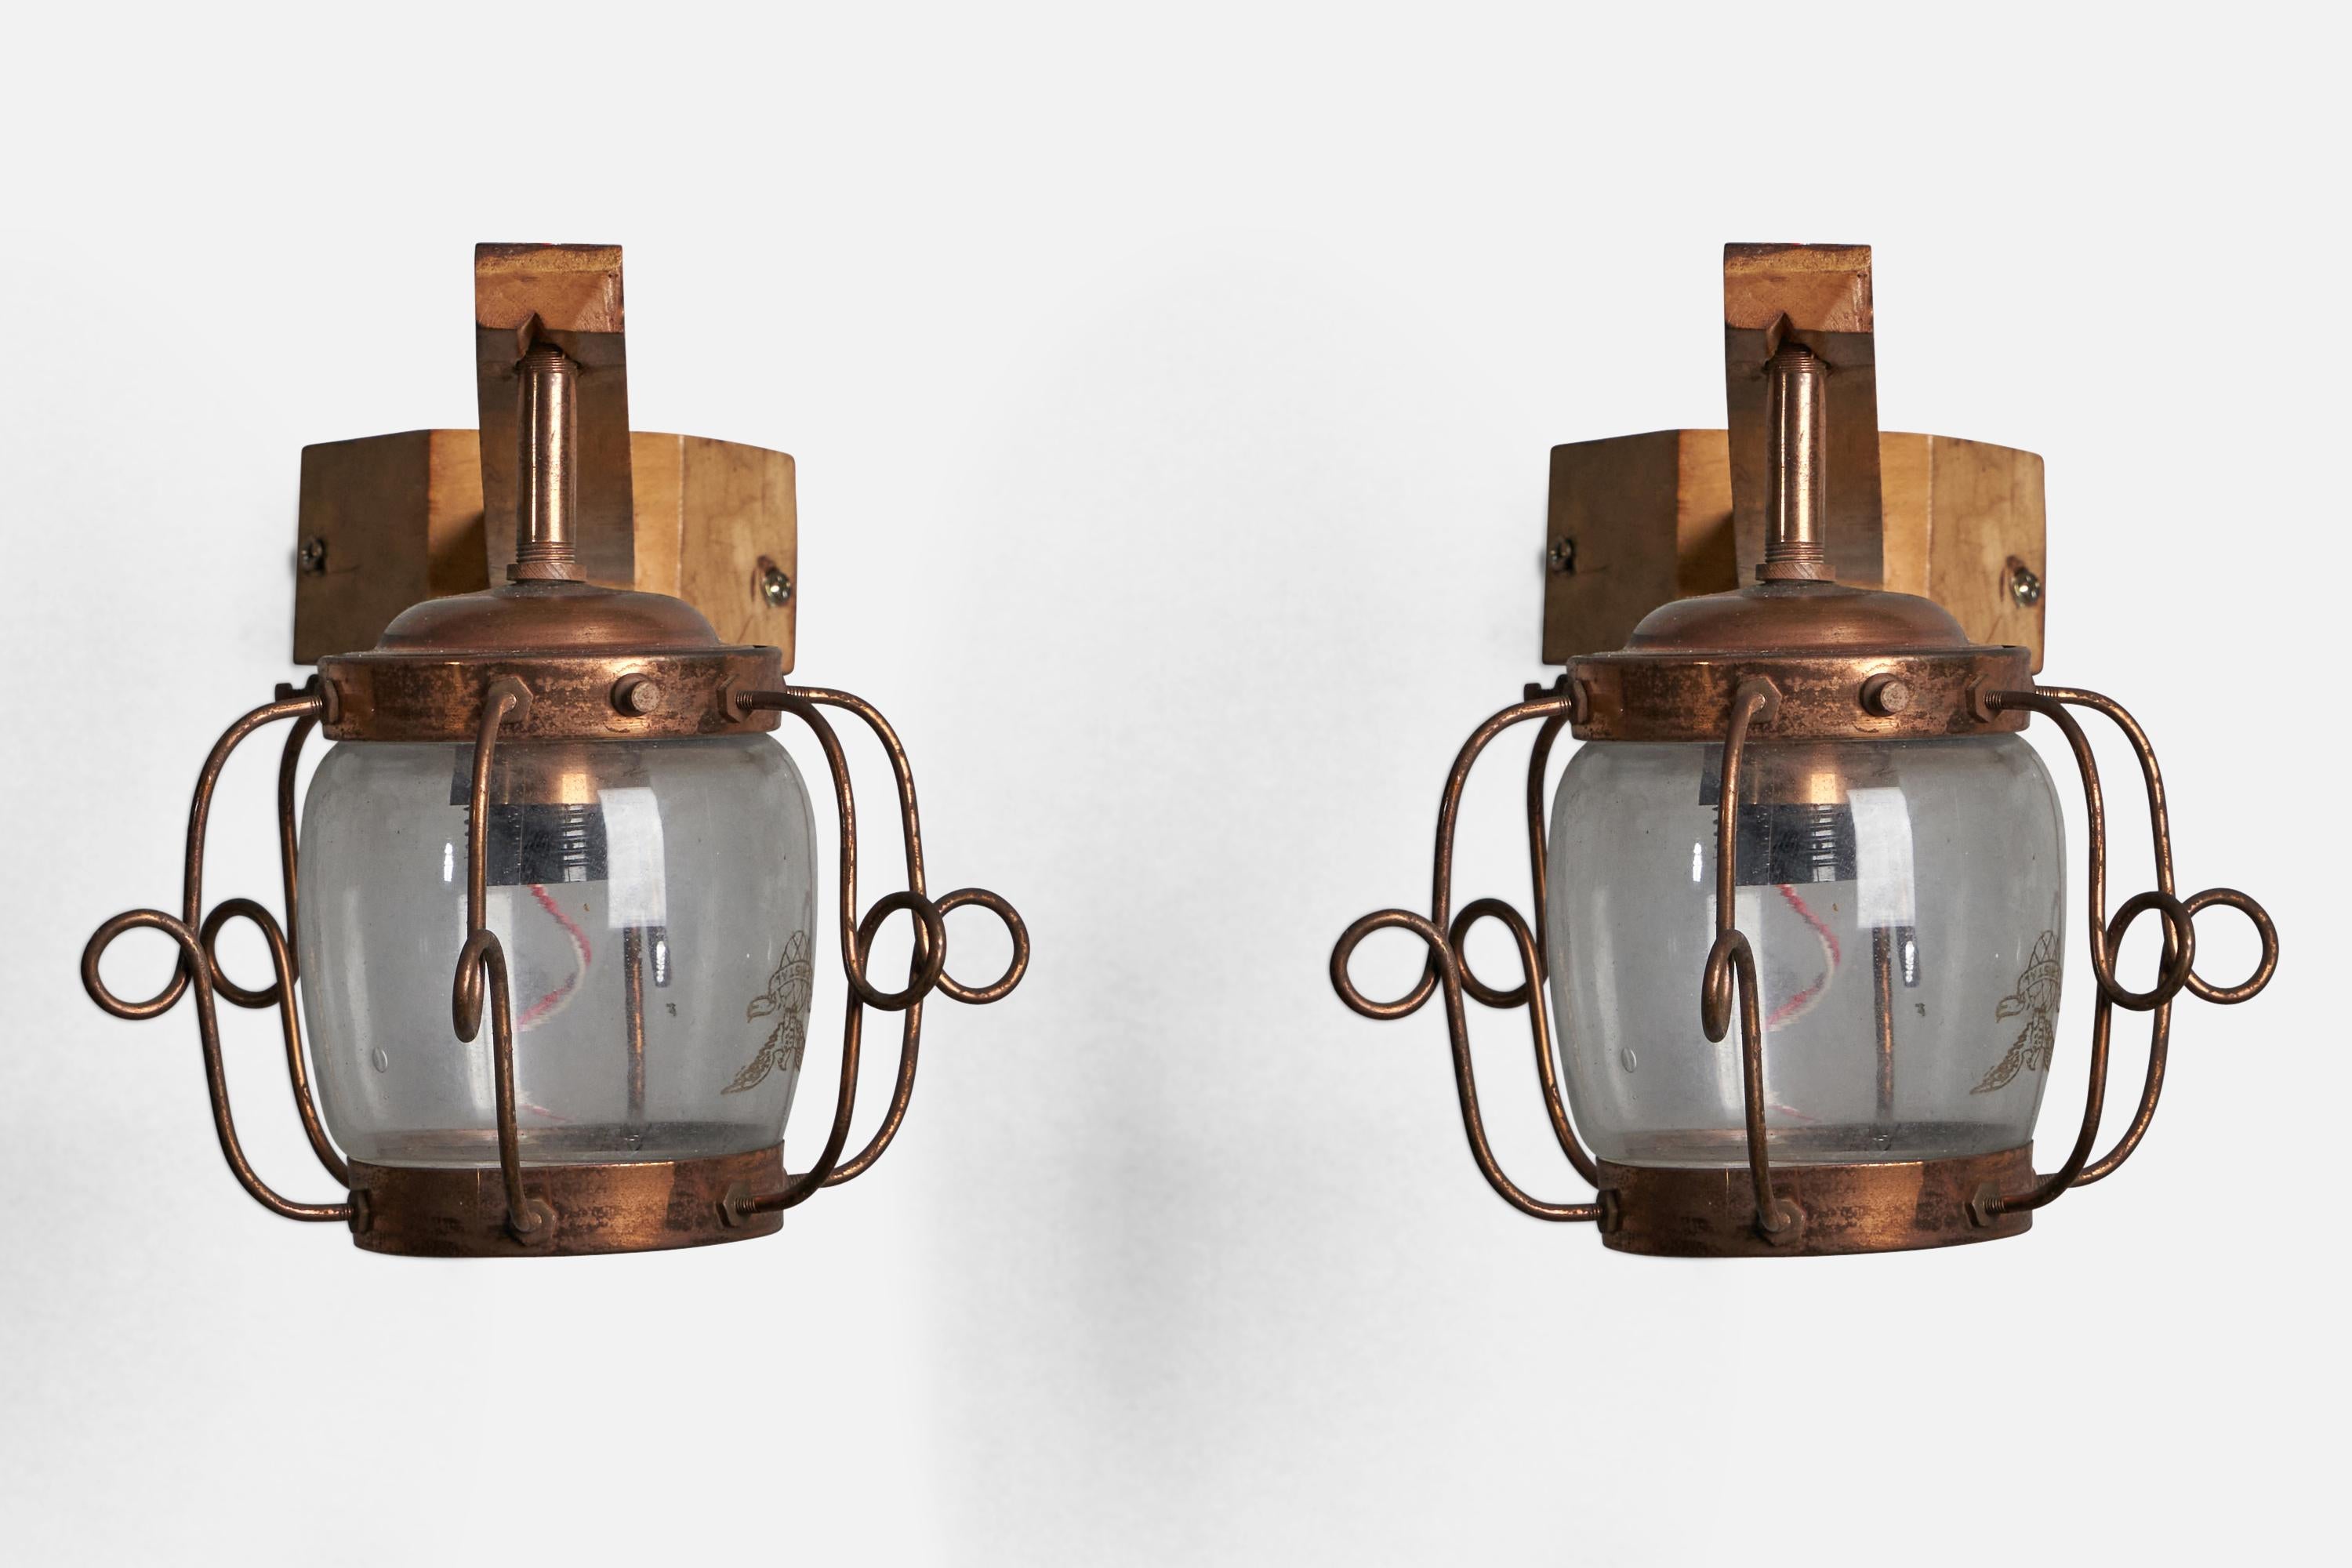 Modern Aldo Tura Attribution, Wall Lights, Copper, Glass, Wood, Italy 1930s For Sale